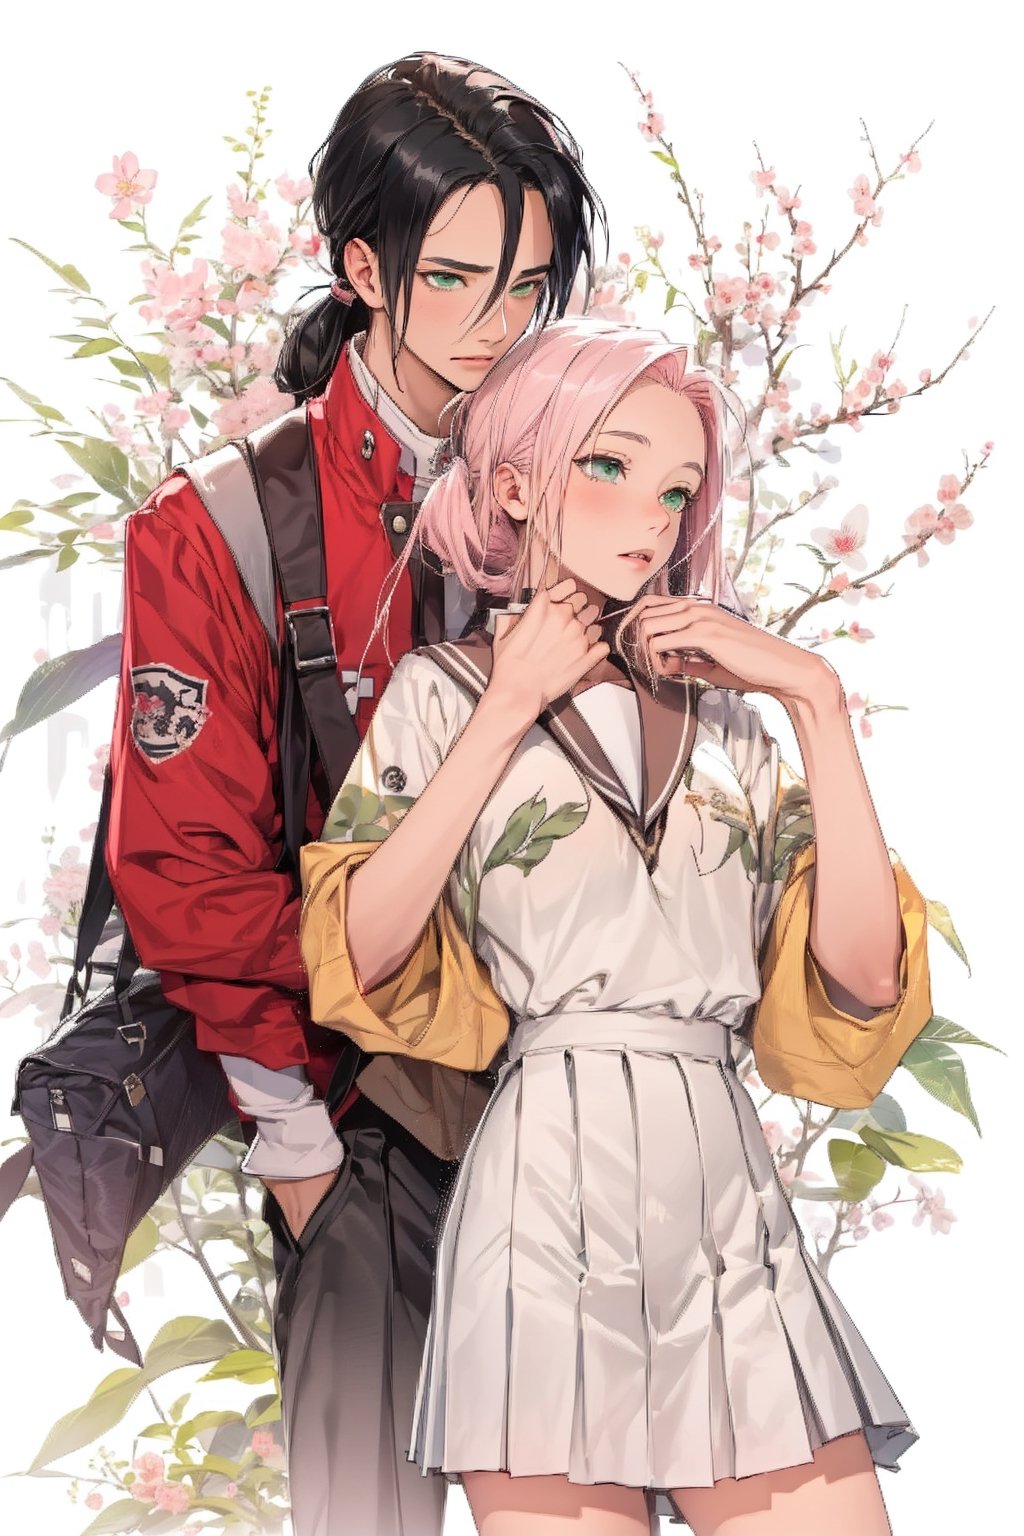 1girl with short pink hair and green eyes named Sakura Haruno in high school uniform, 1man with long black hair in a low ponytail and black eyes named Itachi Uchiha, backhug, high school student, school, school_uniform, harunoshipp,Itachi Uchiha,haruno sakura,school uniform,magic_high_school_uniform,jp_school_uniform,komi_sch